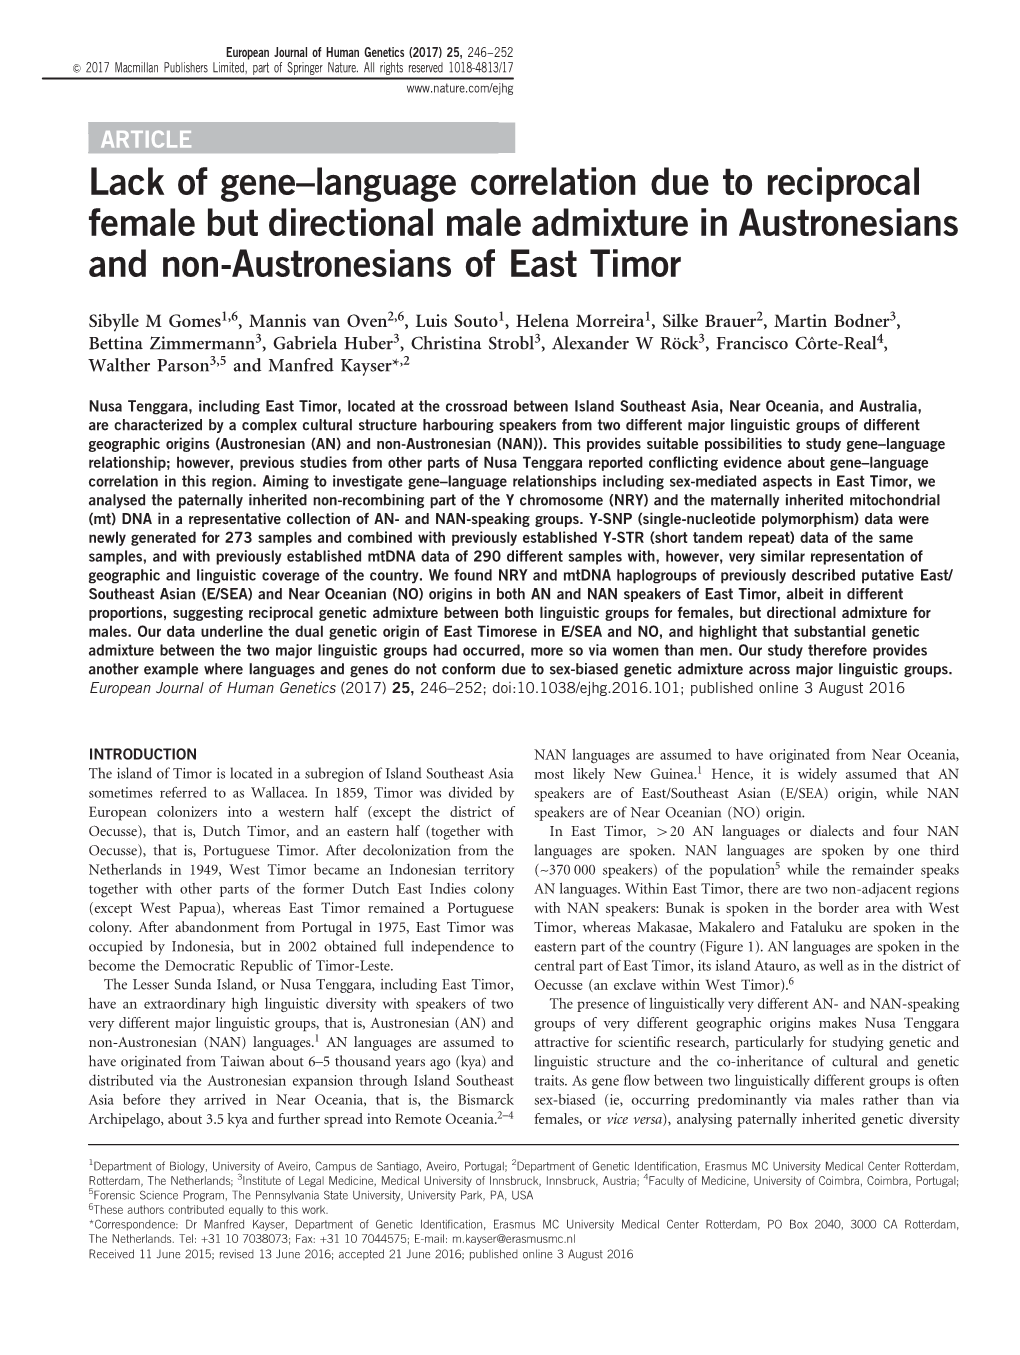 Language Correlation Due to Reciprocal Female but Directional Male Admixture in Austronesians and Non-Austronesians of East Timor